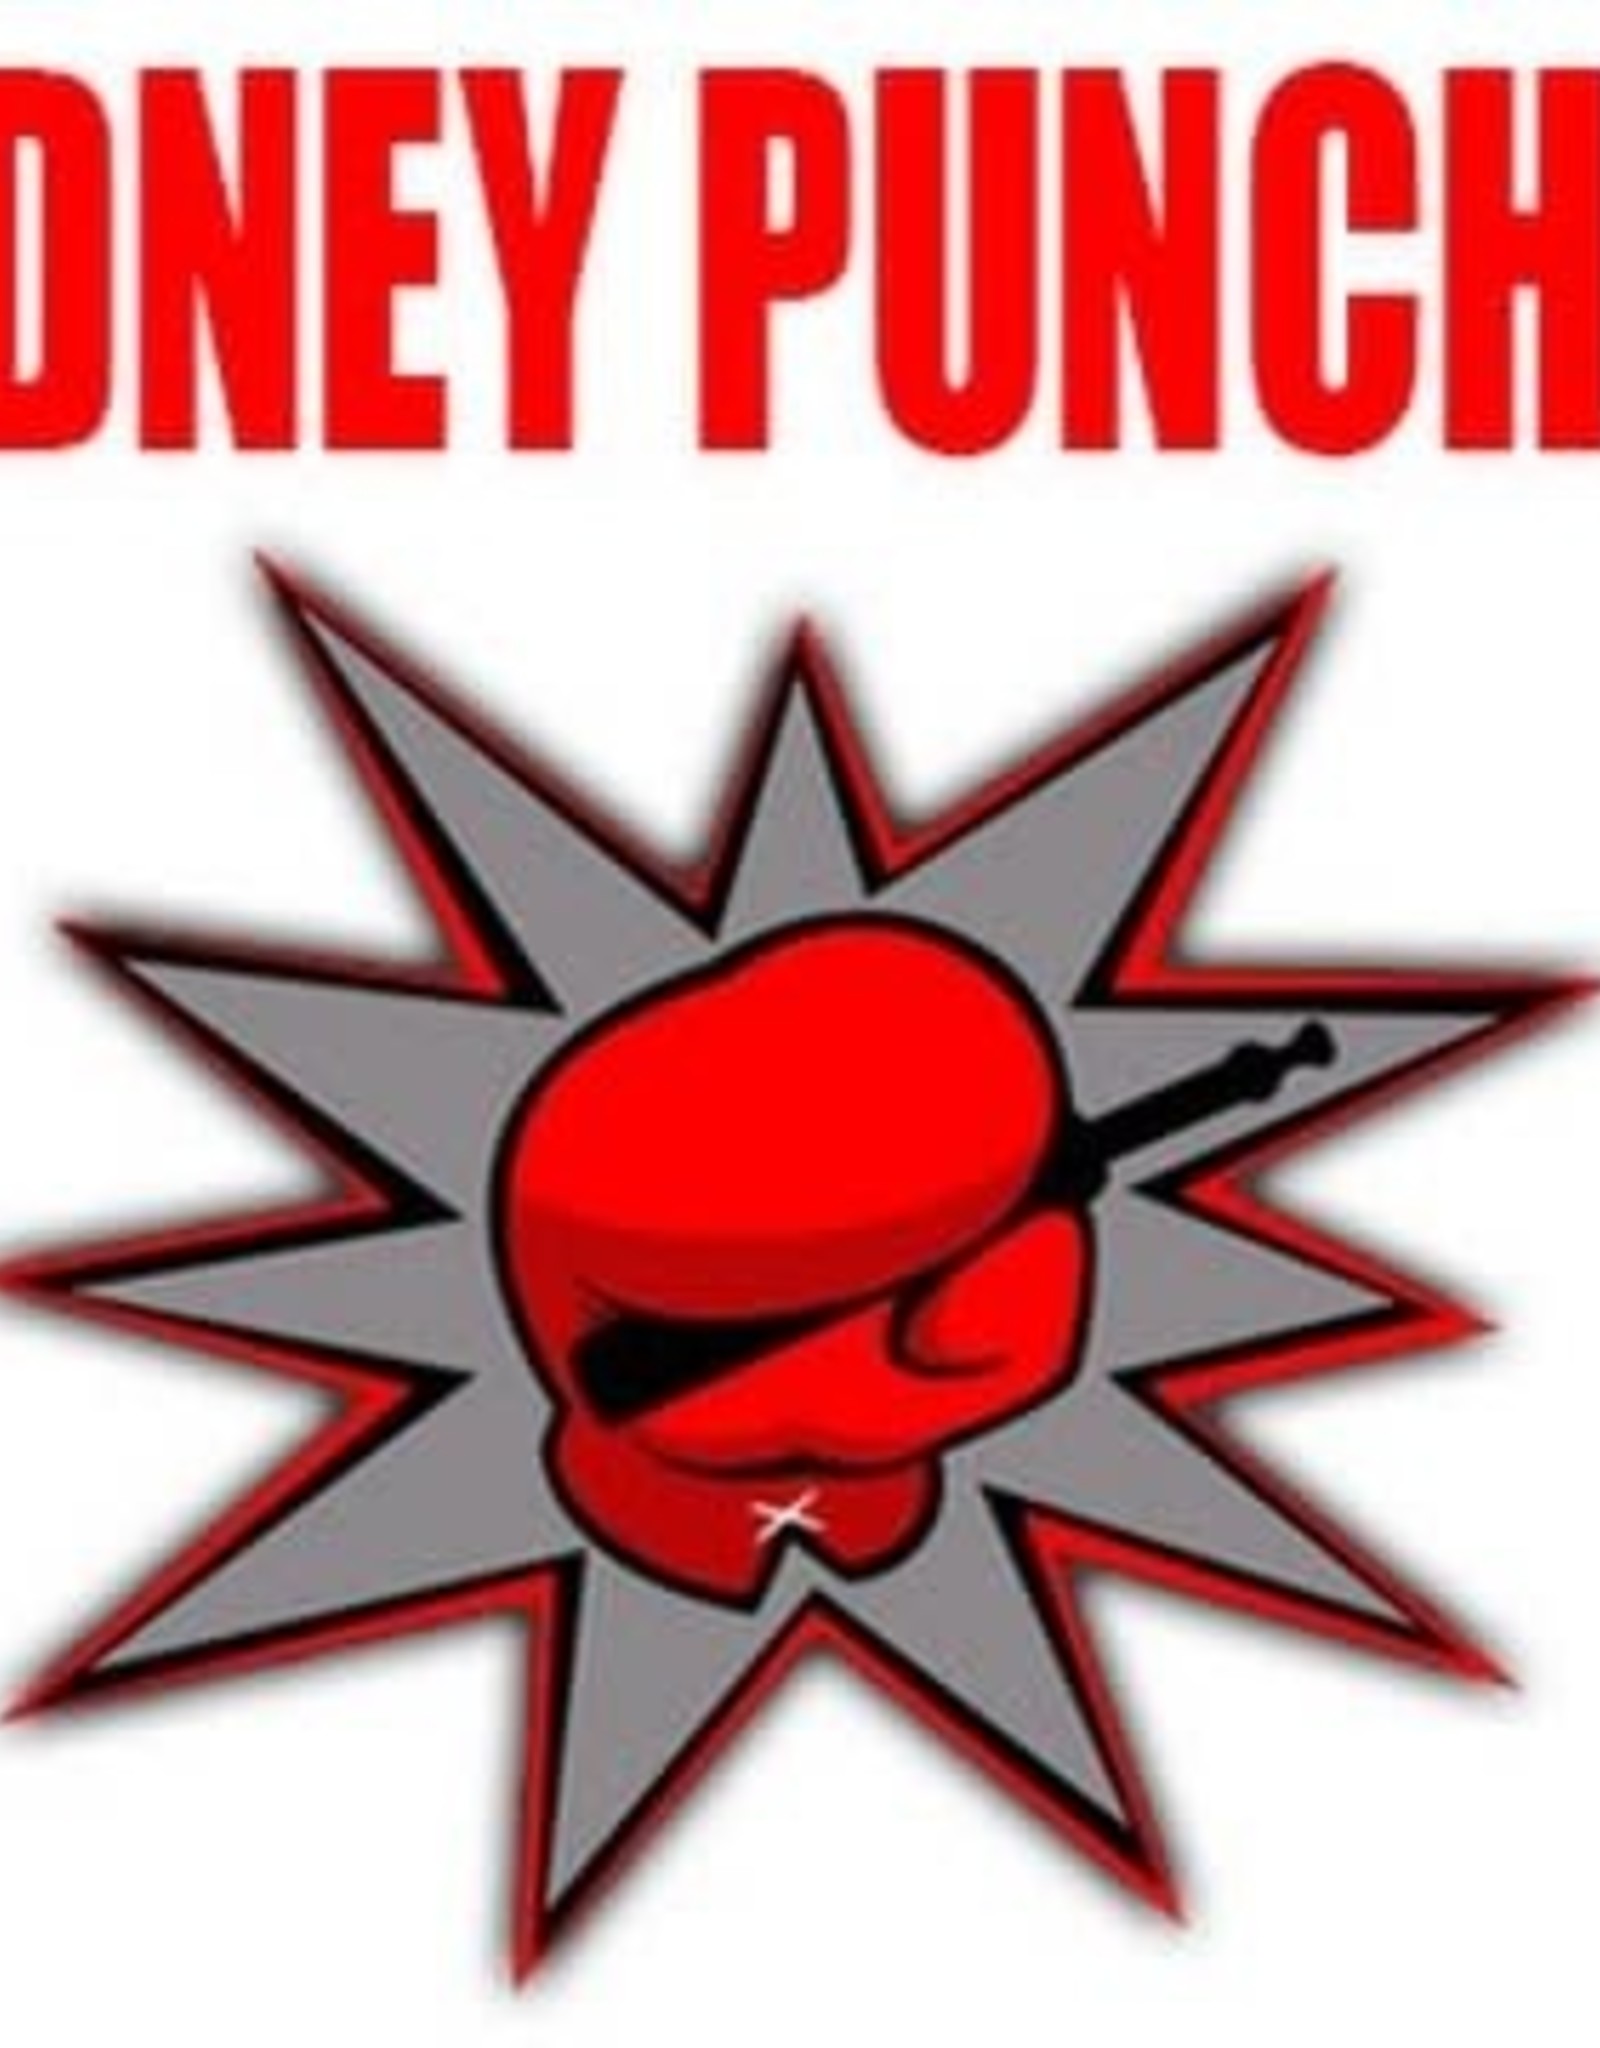 KIDNEY PUNCHER 22 A1 30FT WIRE